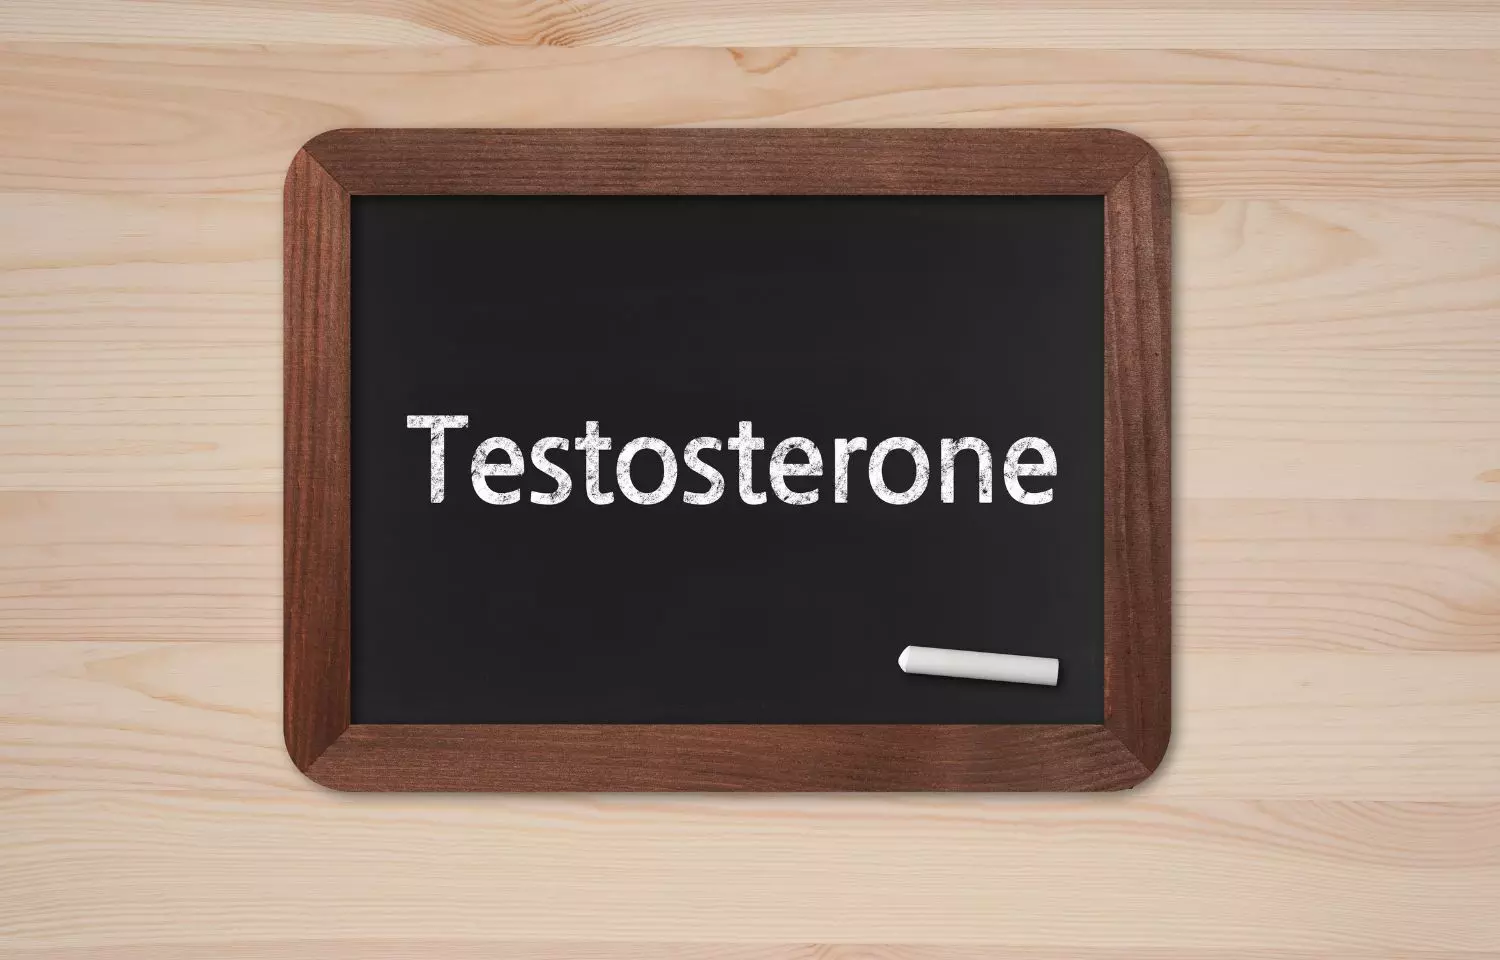 Little Evidence of Heart Problems in Men Undergoing Testosterone Treatment, finds analysis